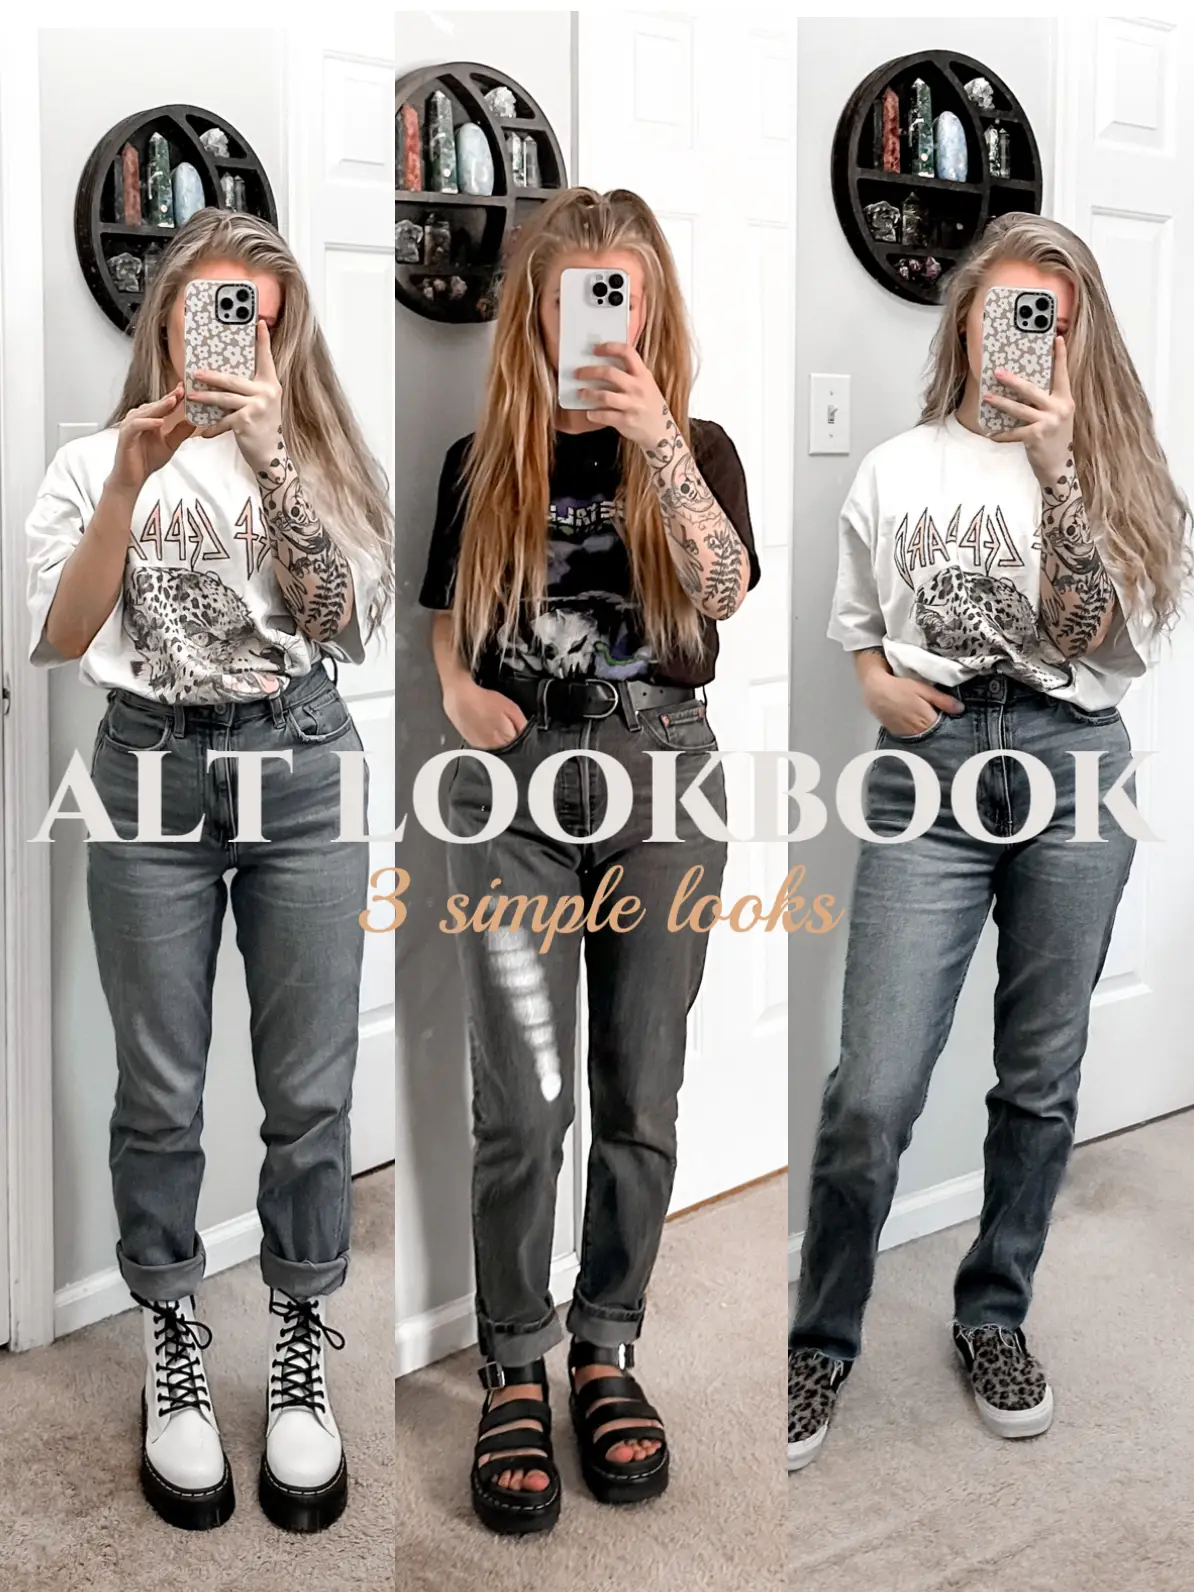 PUNK ROCK FASHION TREND — STYLED BY JADE & CO - PERSONAL FASHION